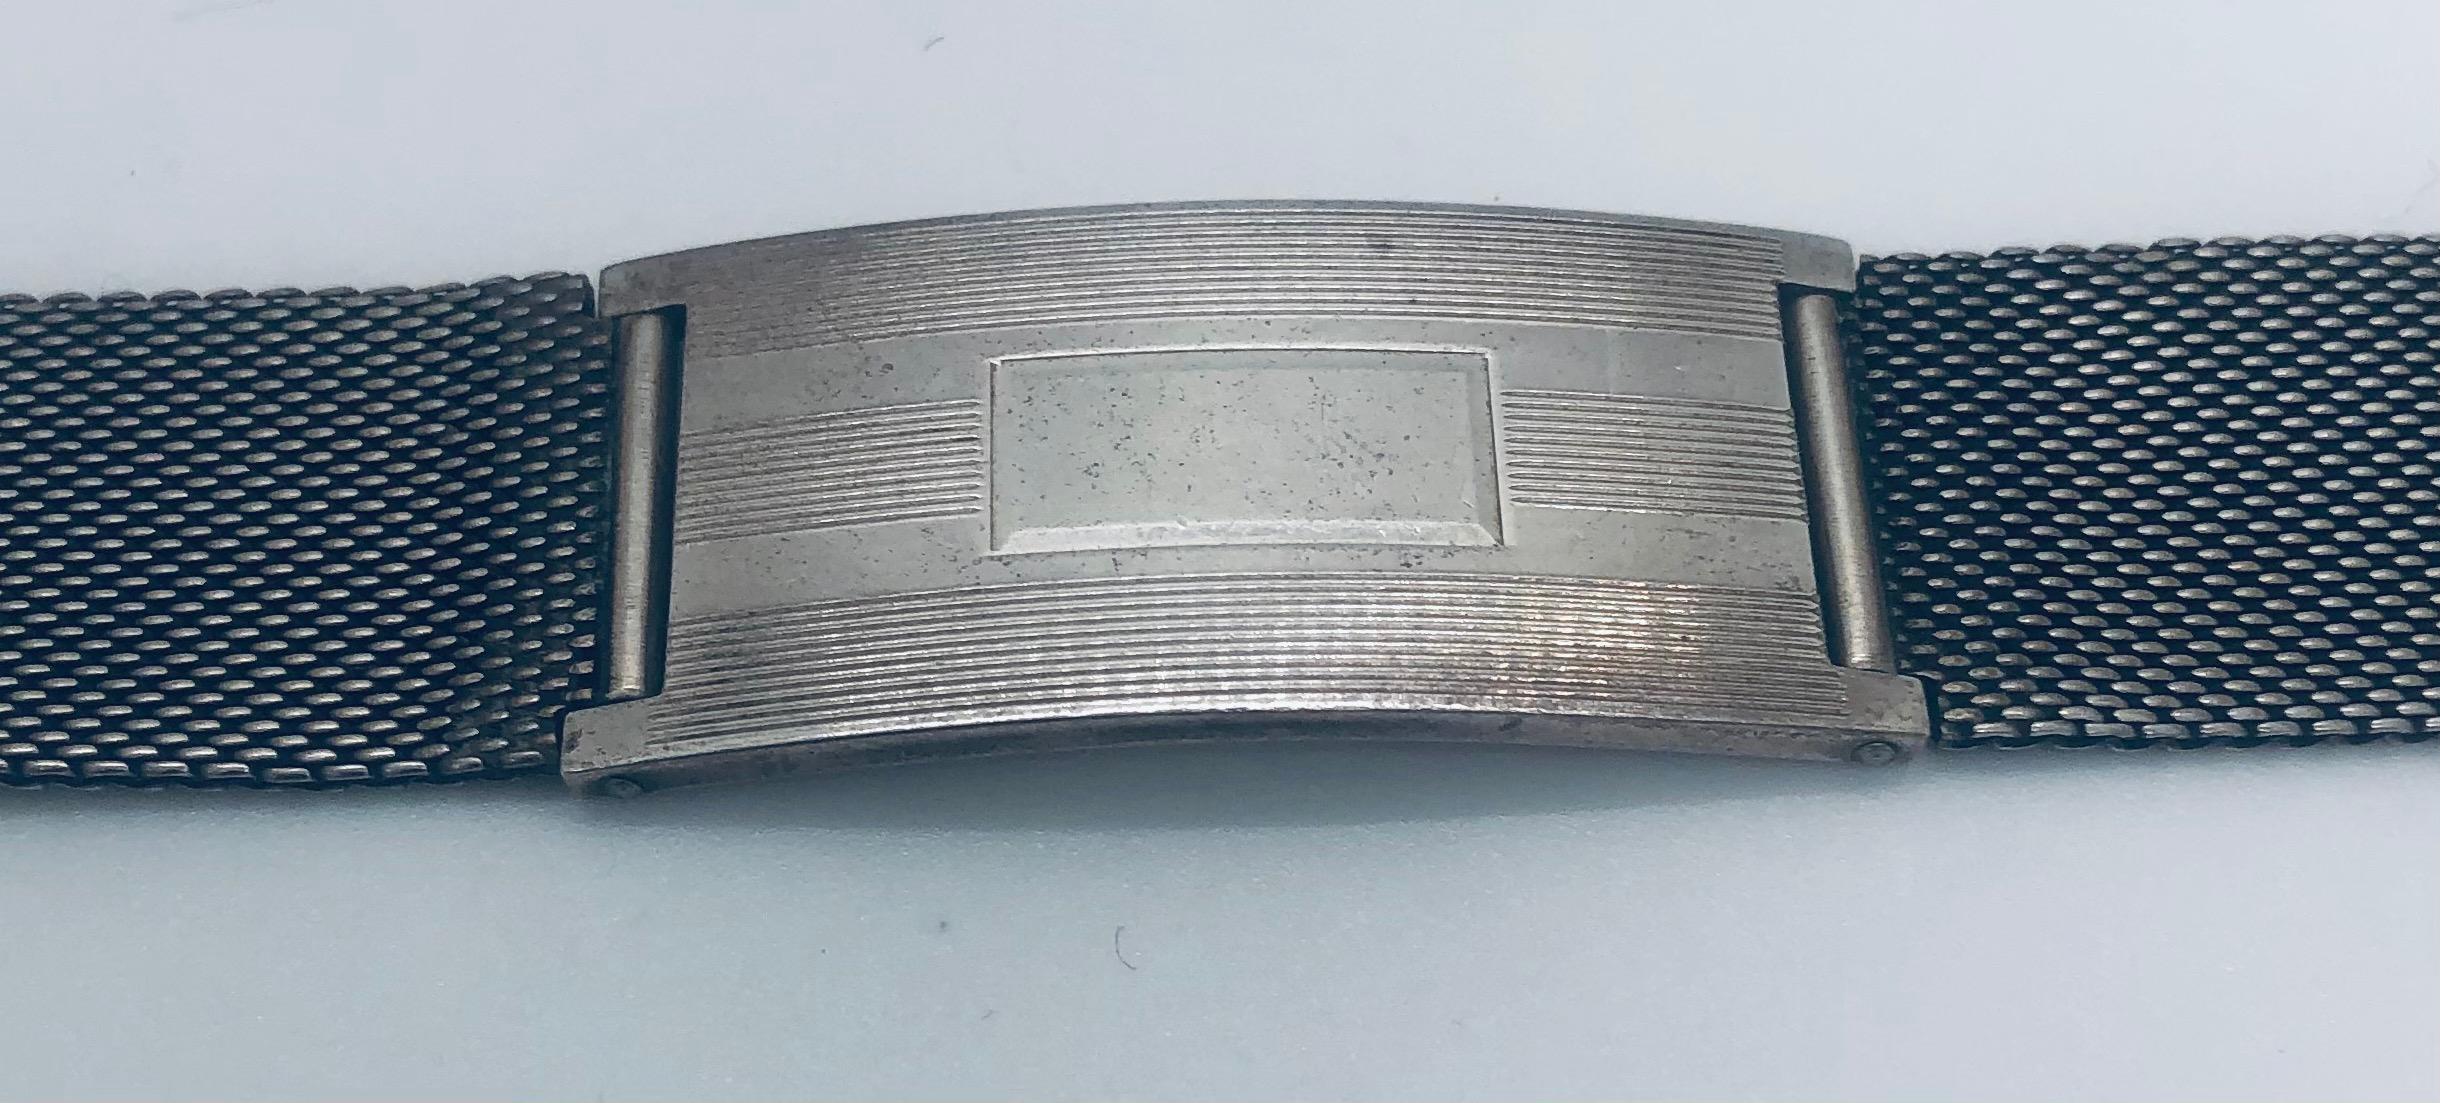 a 1990s Ralph Lauren sterling silver Mesh link bracelet, finely made and signed Ralph Lauren sterling.

Dimensions : 7” L x 0.75” W.

